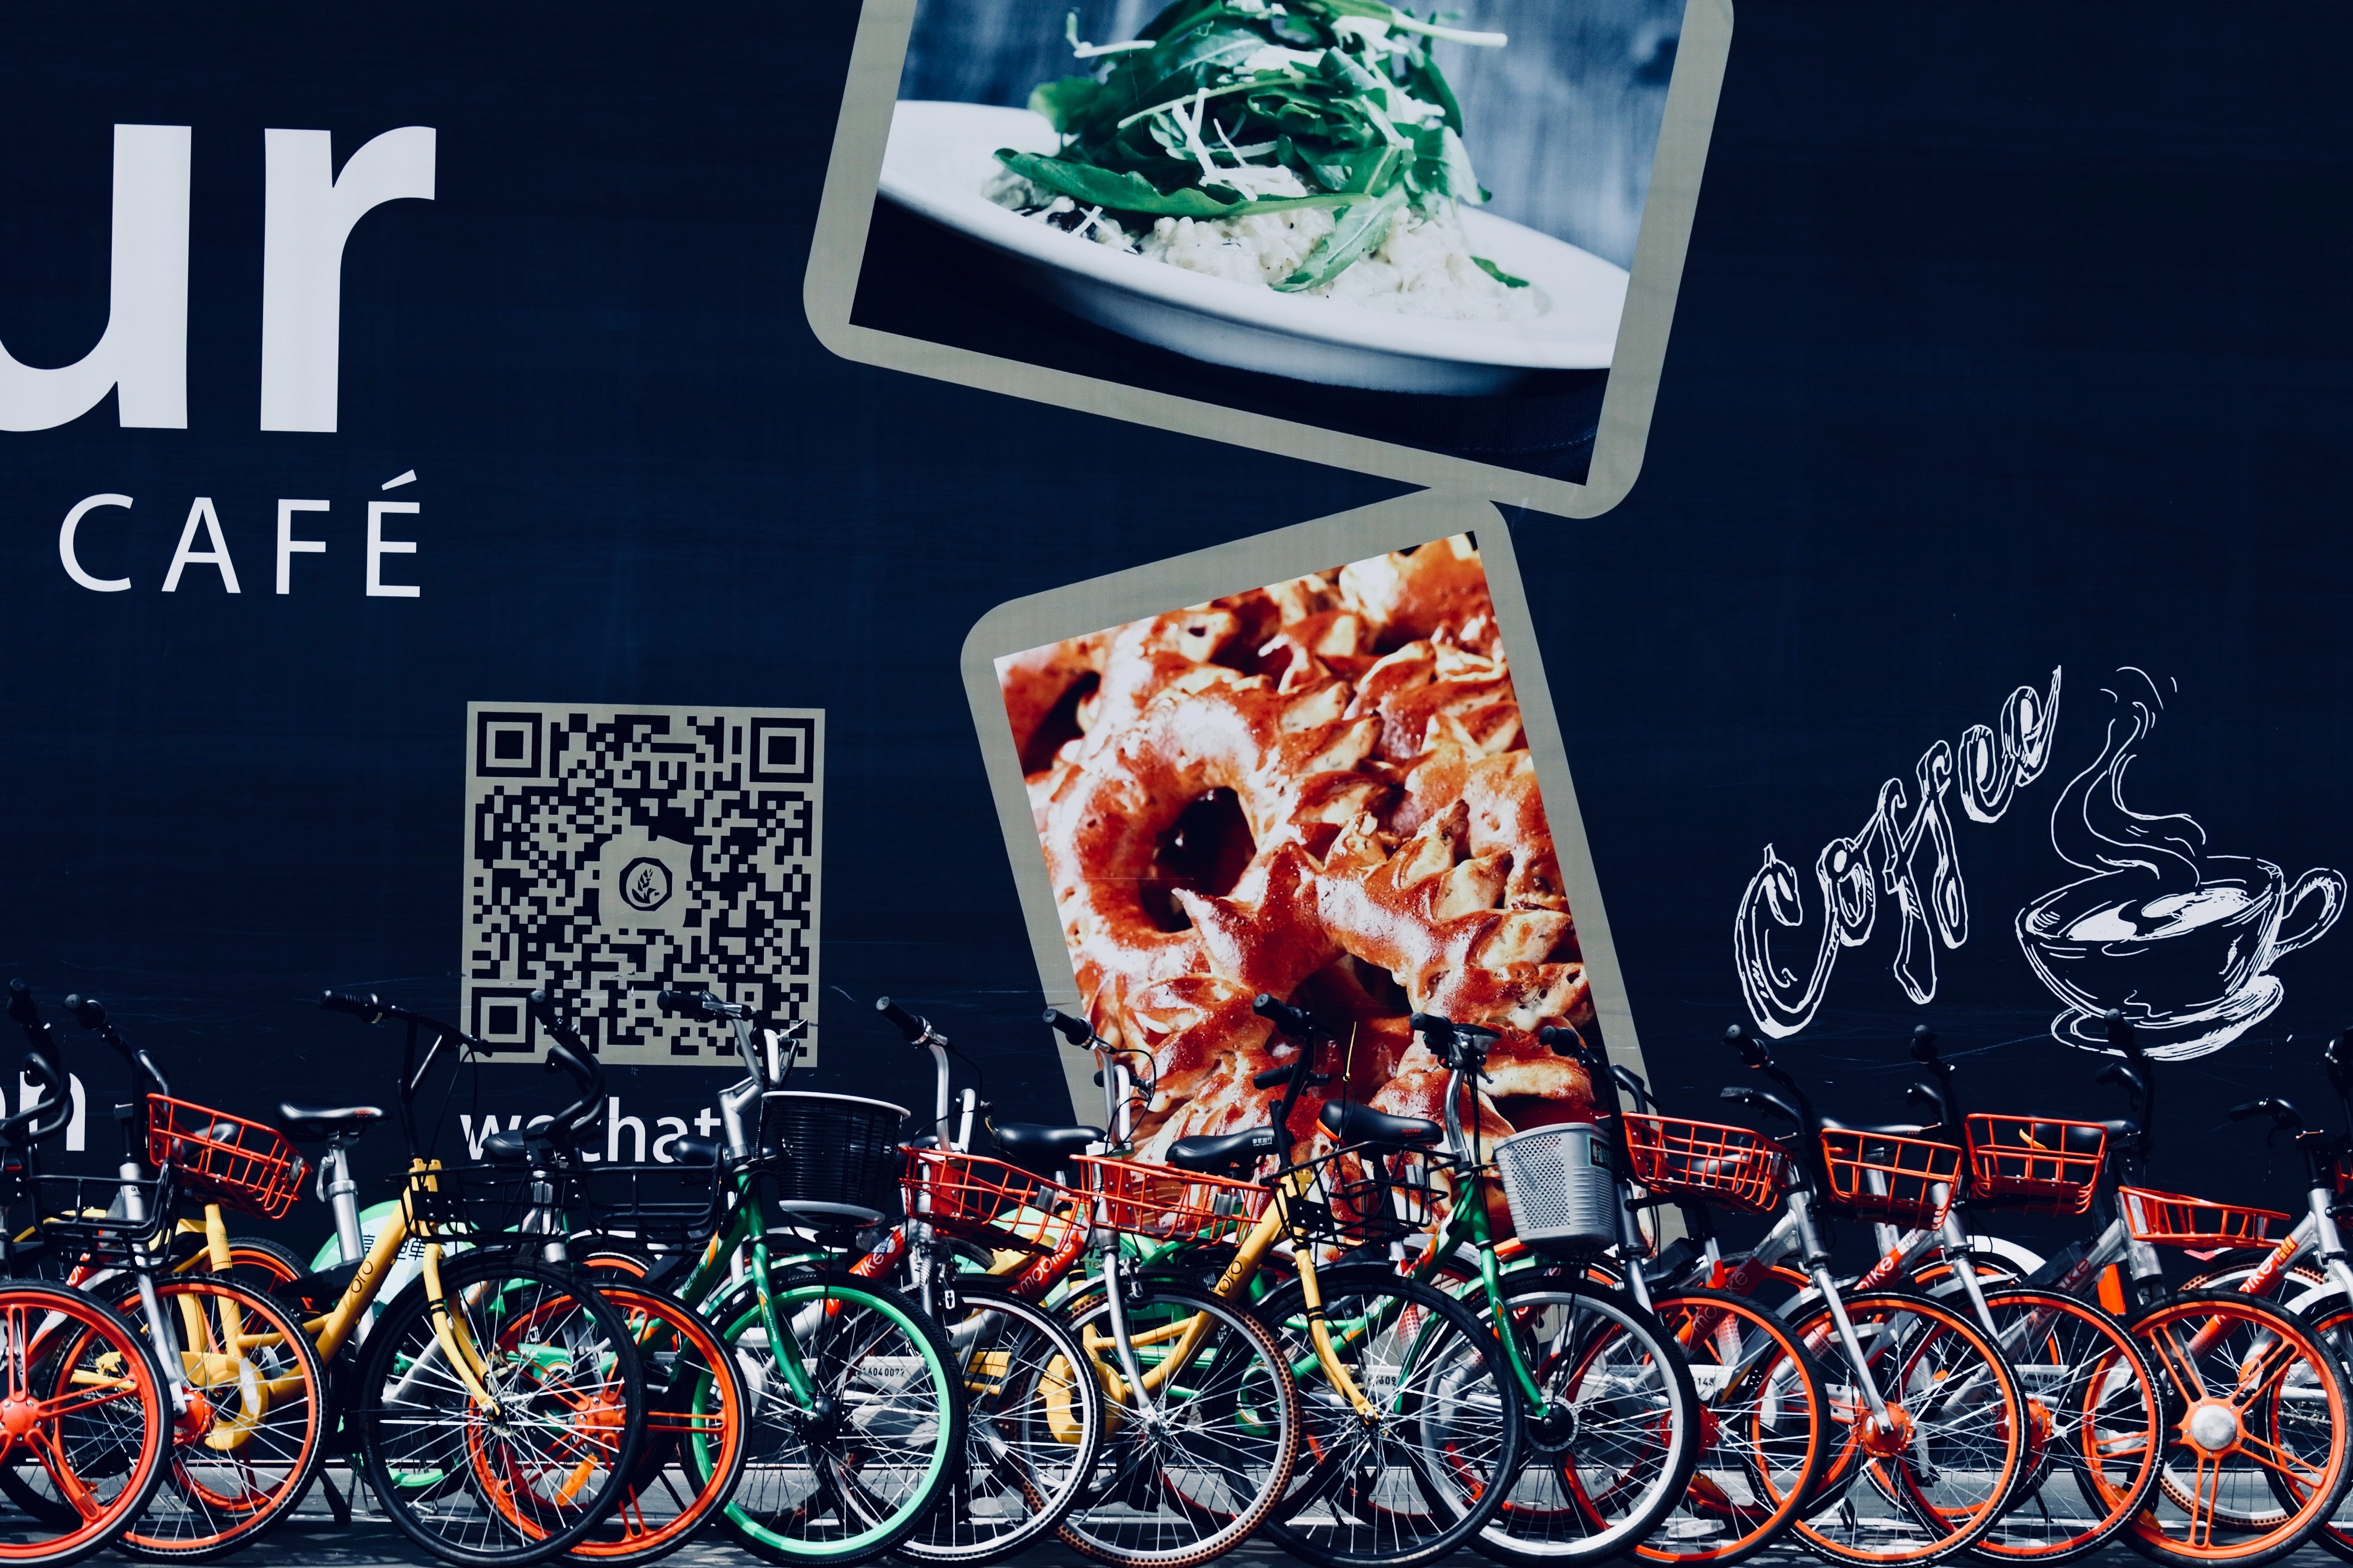 An image of a QR code printed on a wall behind packed bicycles.